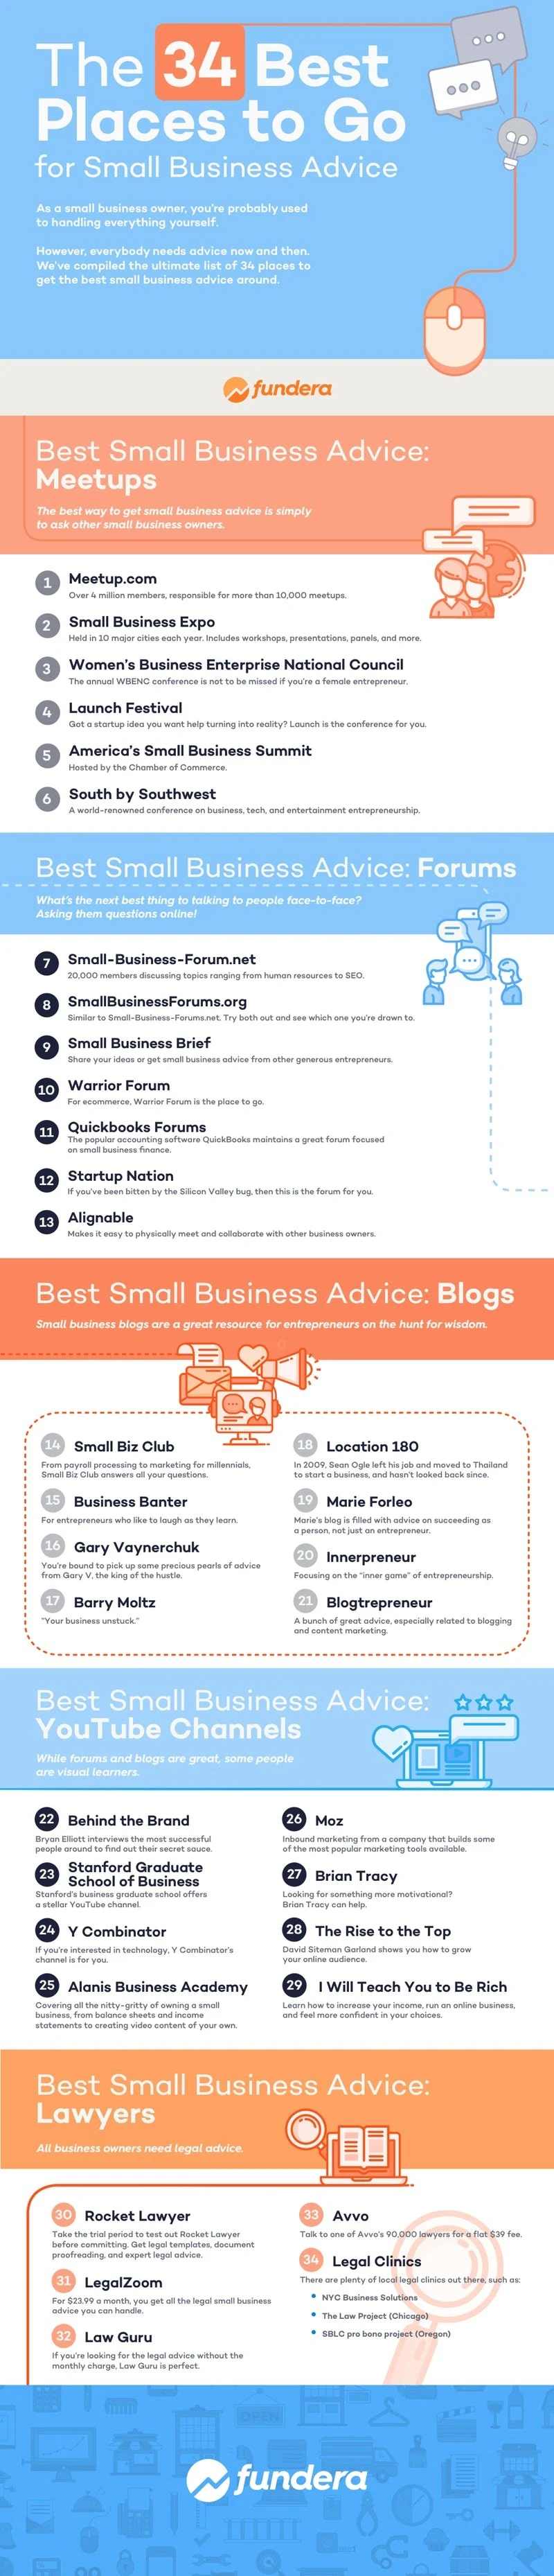 The 34 Best Places to Go for Small Business Advice - #Infographic